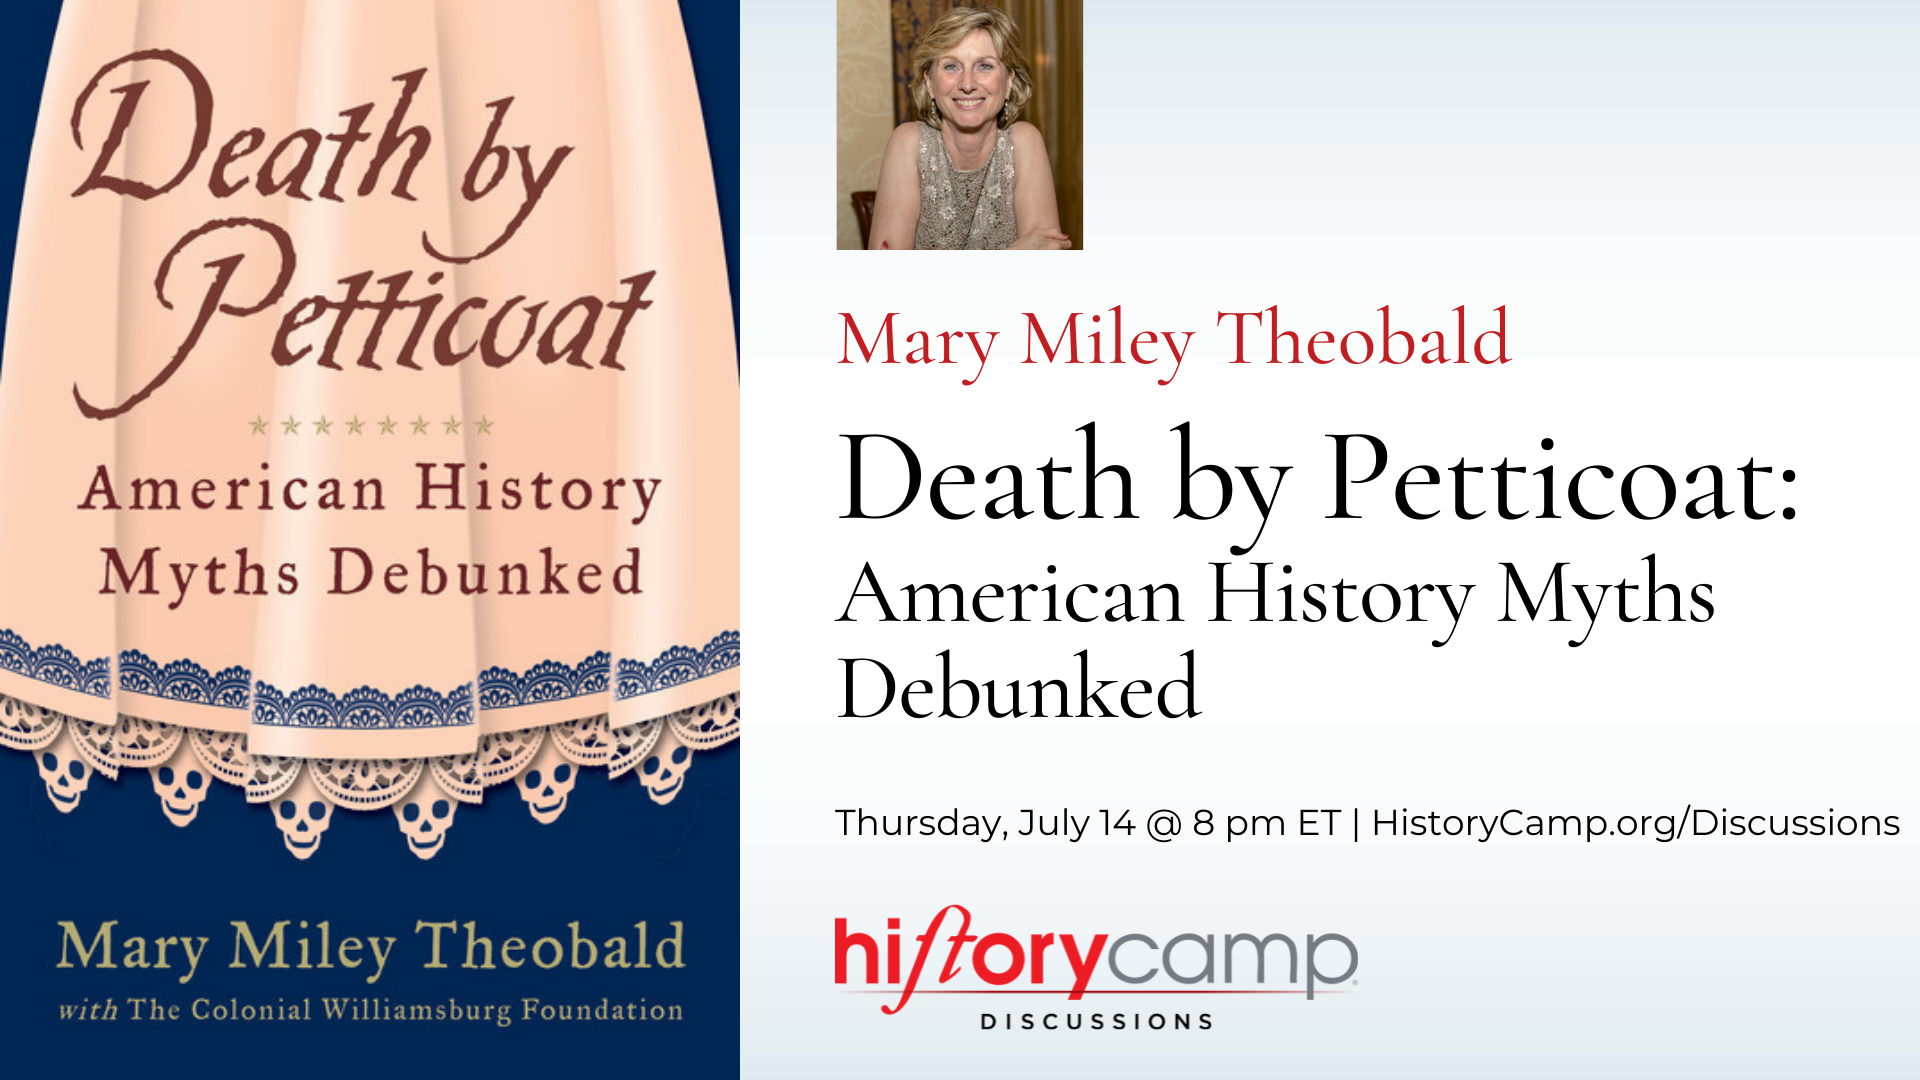 history-camp-discussion-death-by-petticoat-mary-miley-theobald